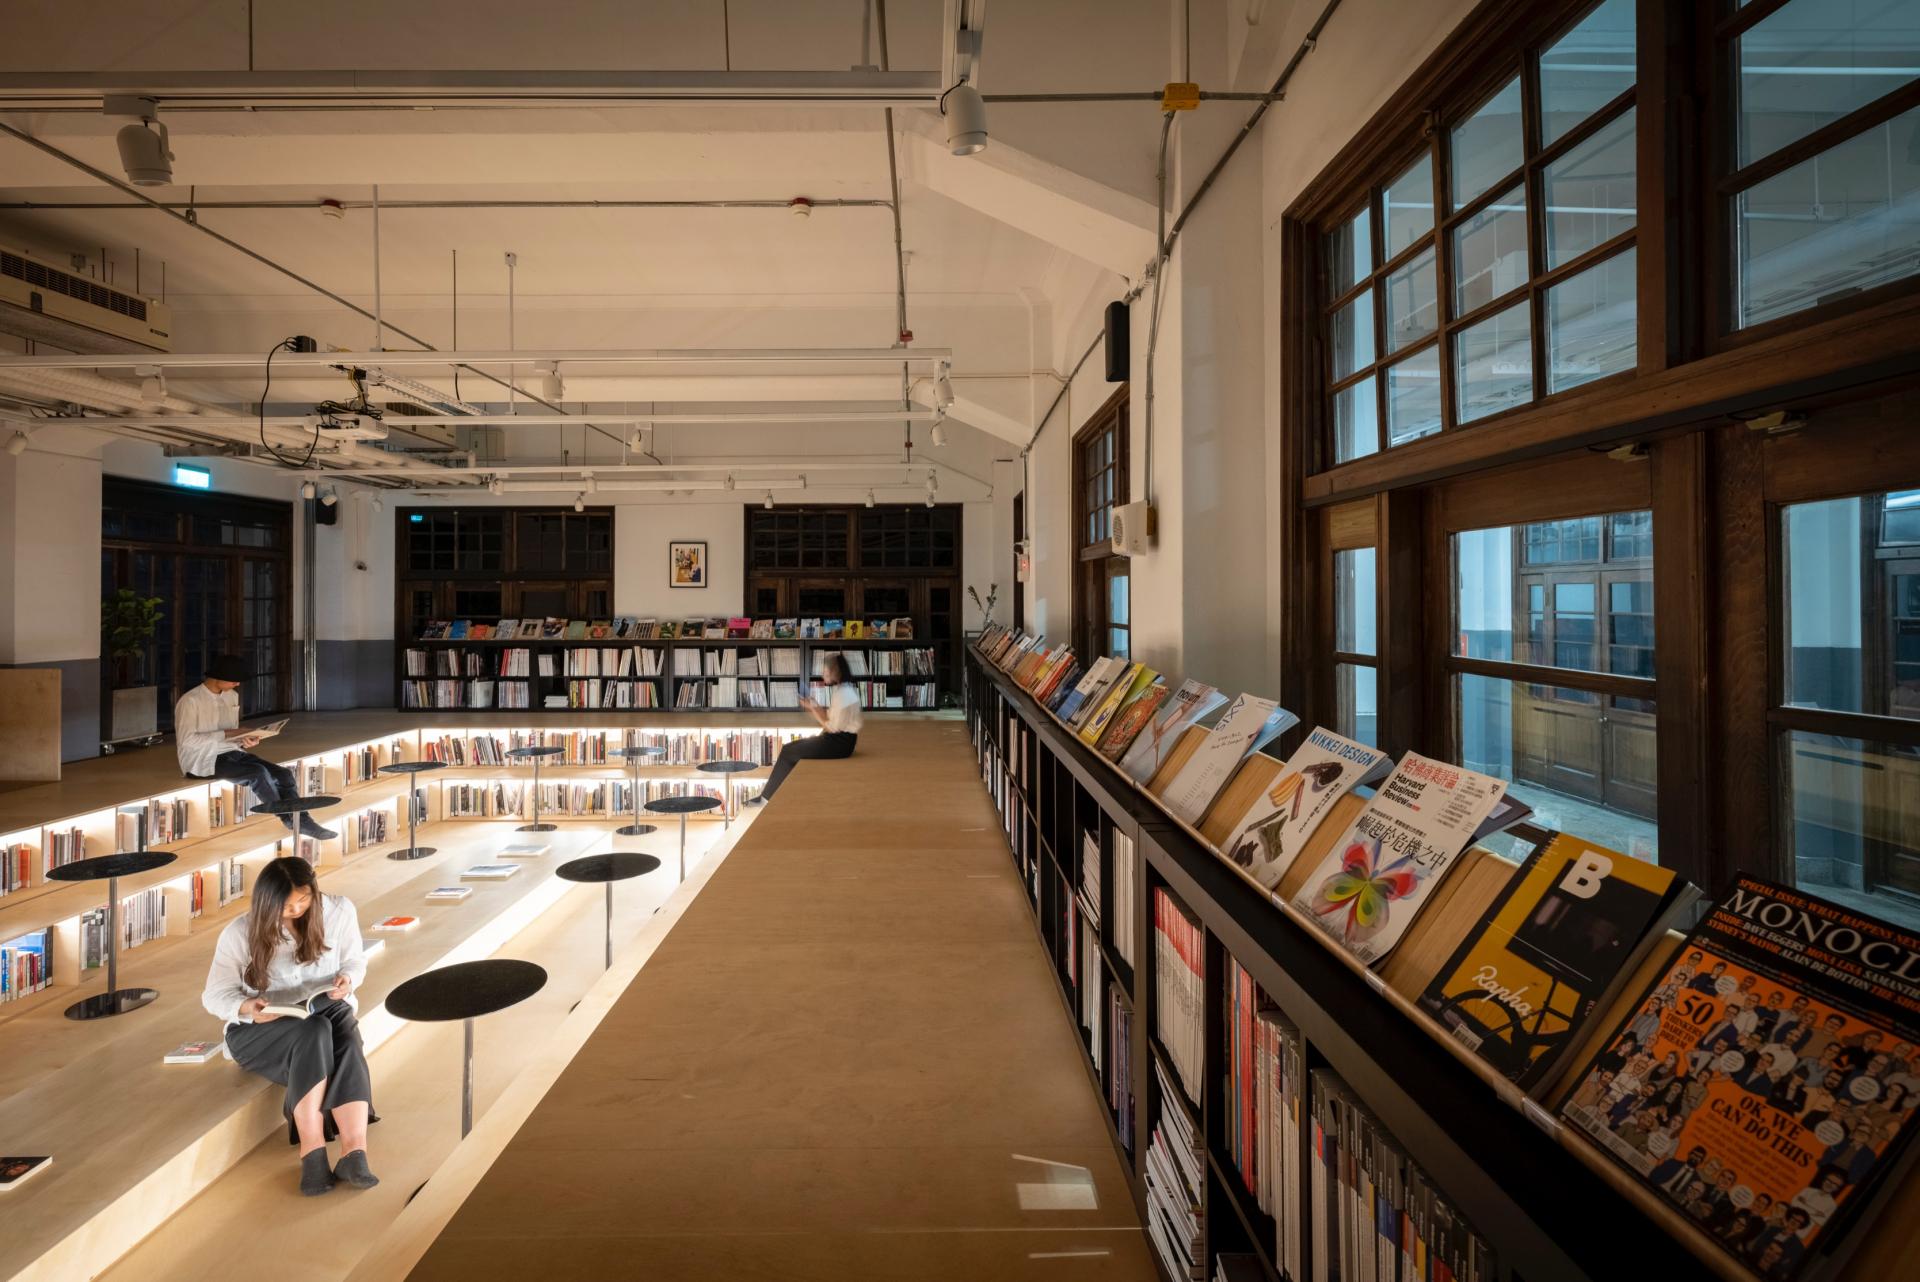 An 83-year-old Taipei bathhouse is transformed into a library and cultural venue